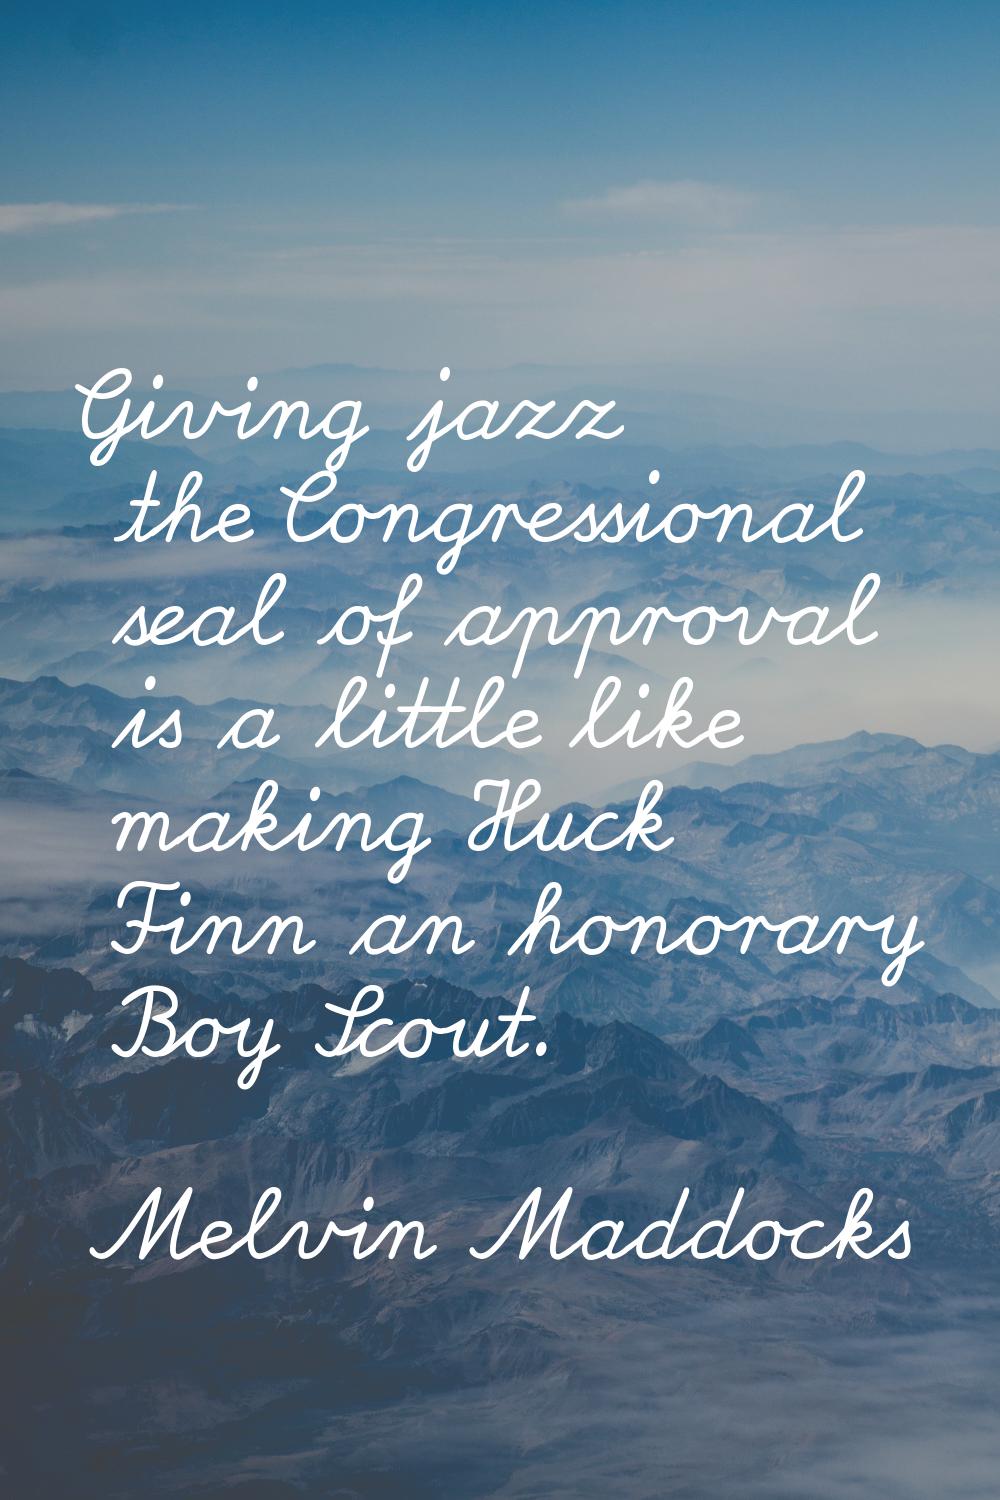 Giving jazz the Congressional seal of approval is a little like making Huck Finn an honorary Boy Sc